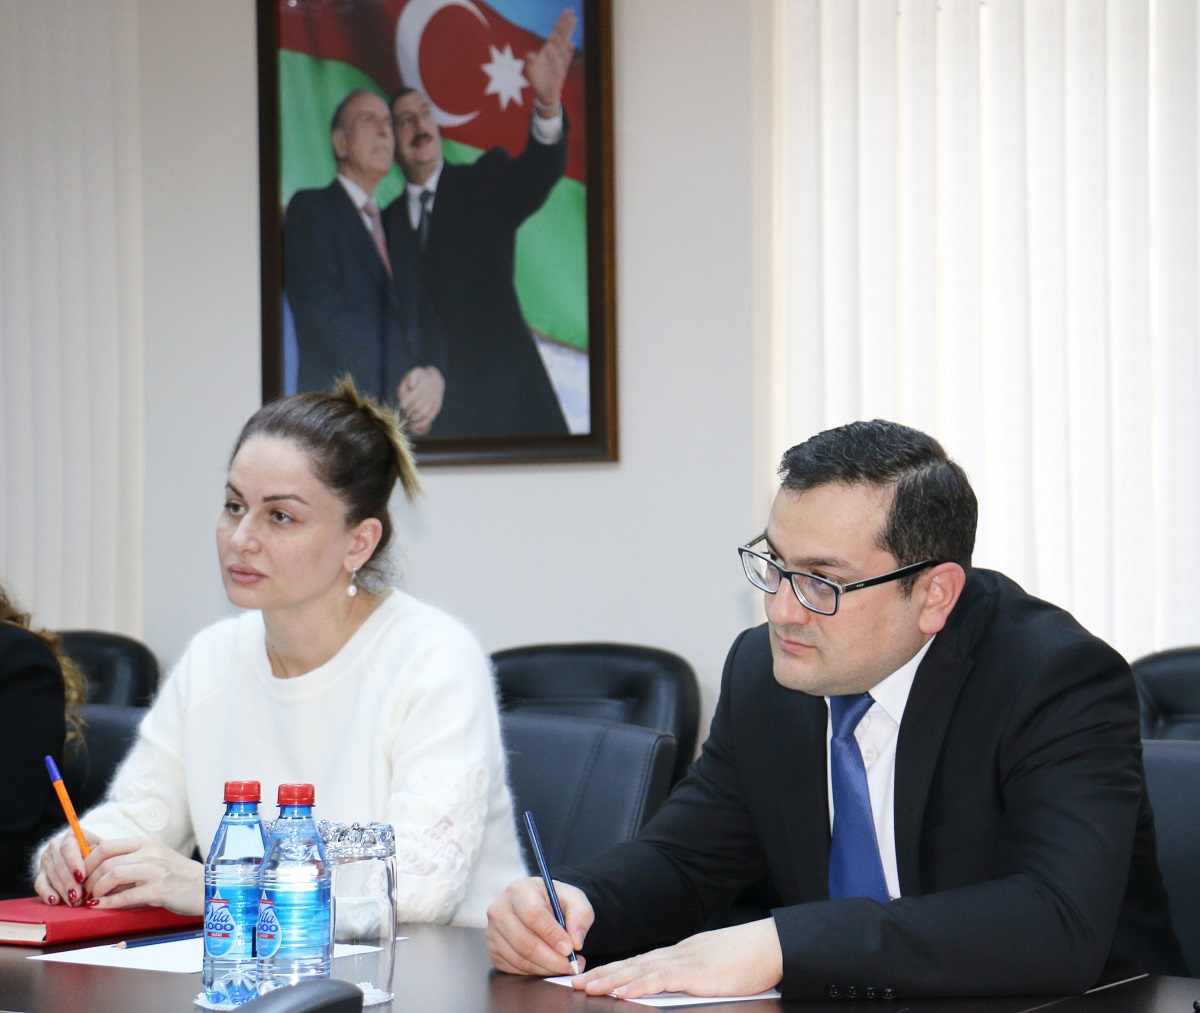 An event on strengthening the fight against corruption was held at CAERC